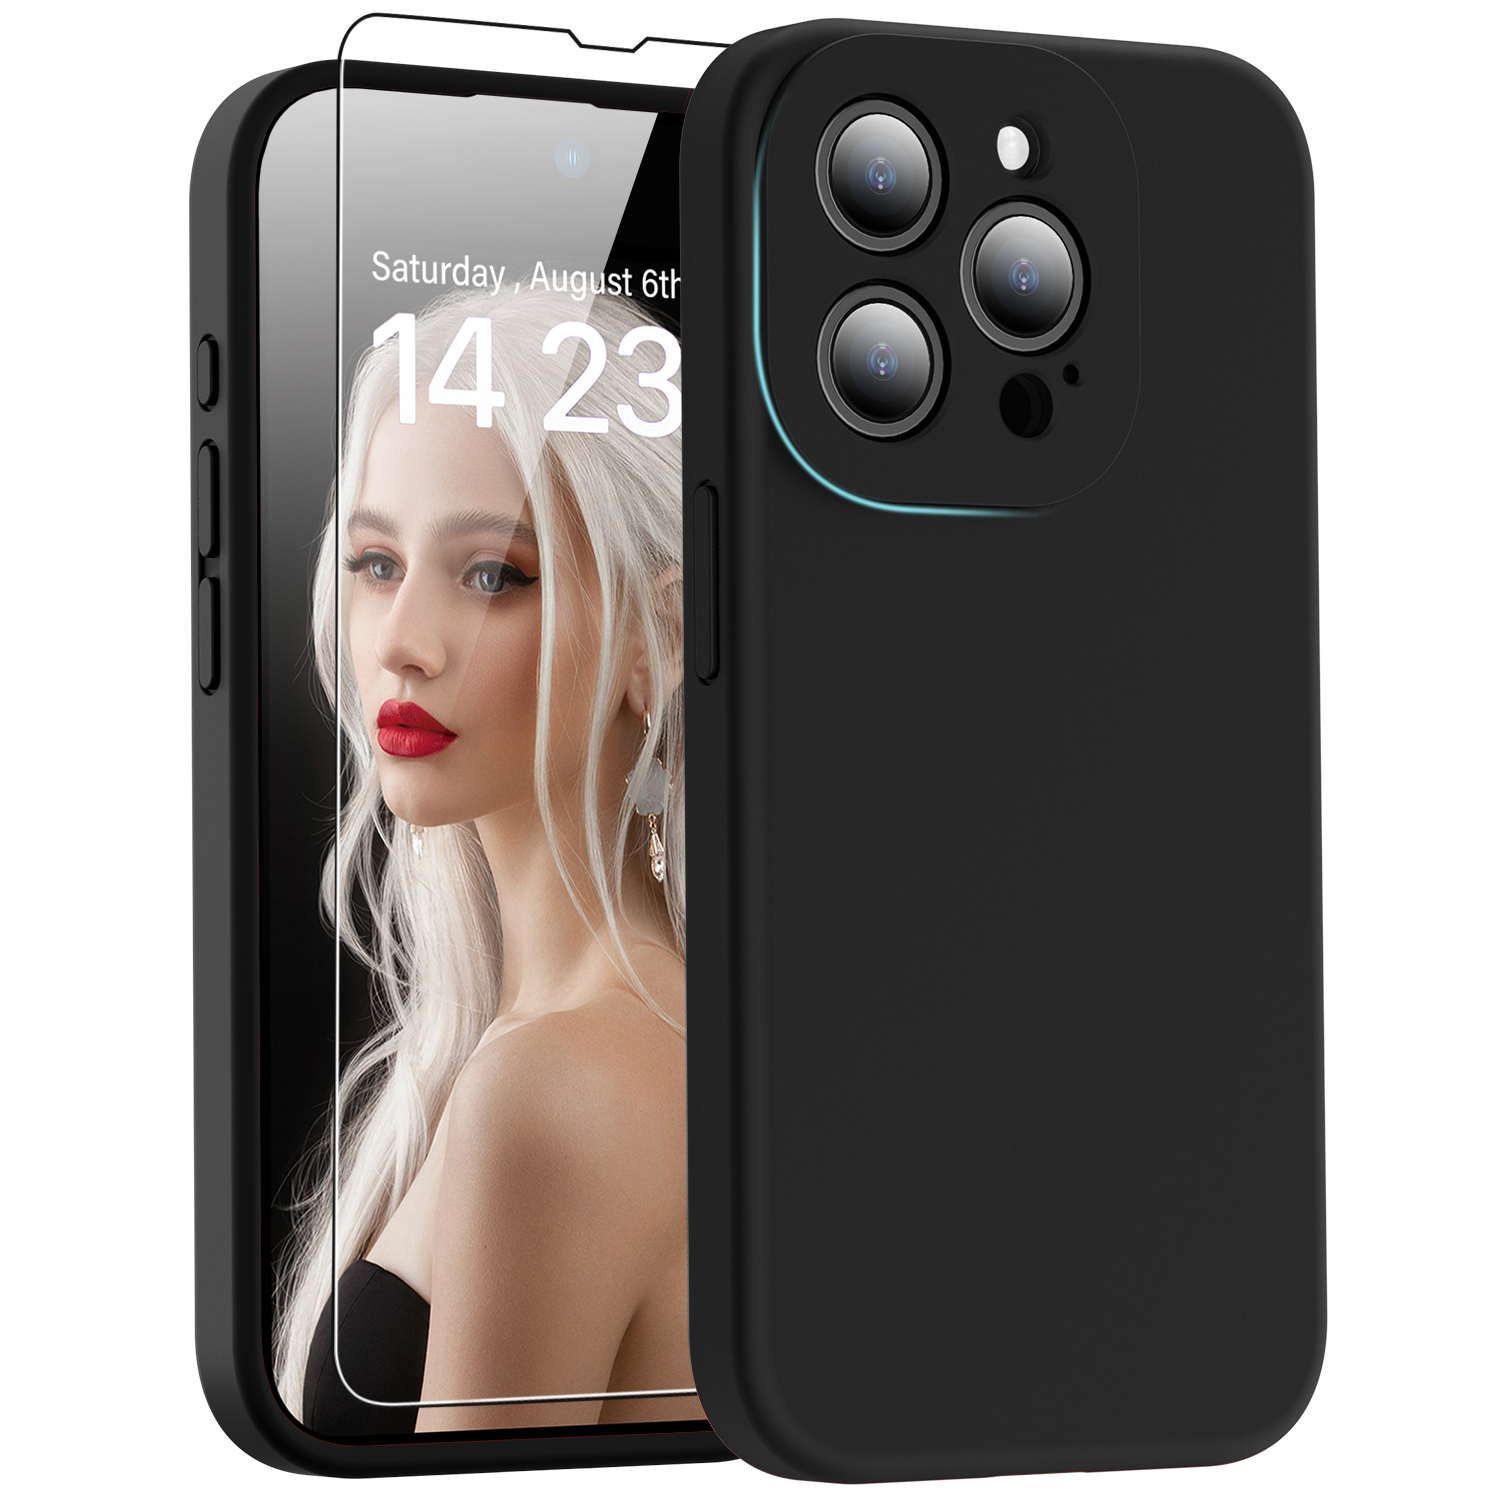 DEENAKIN Silicone Case for iPh